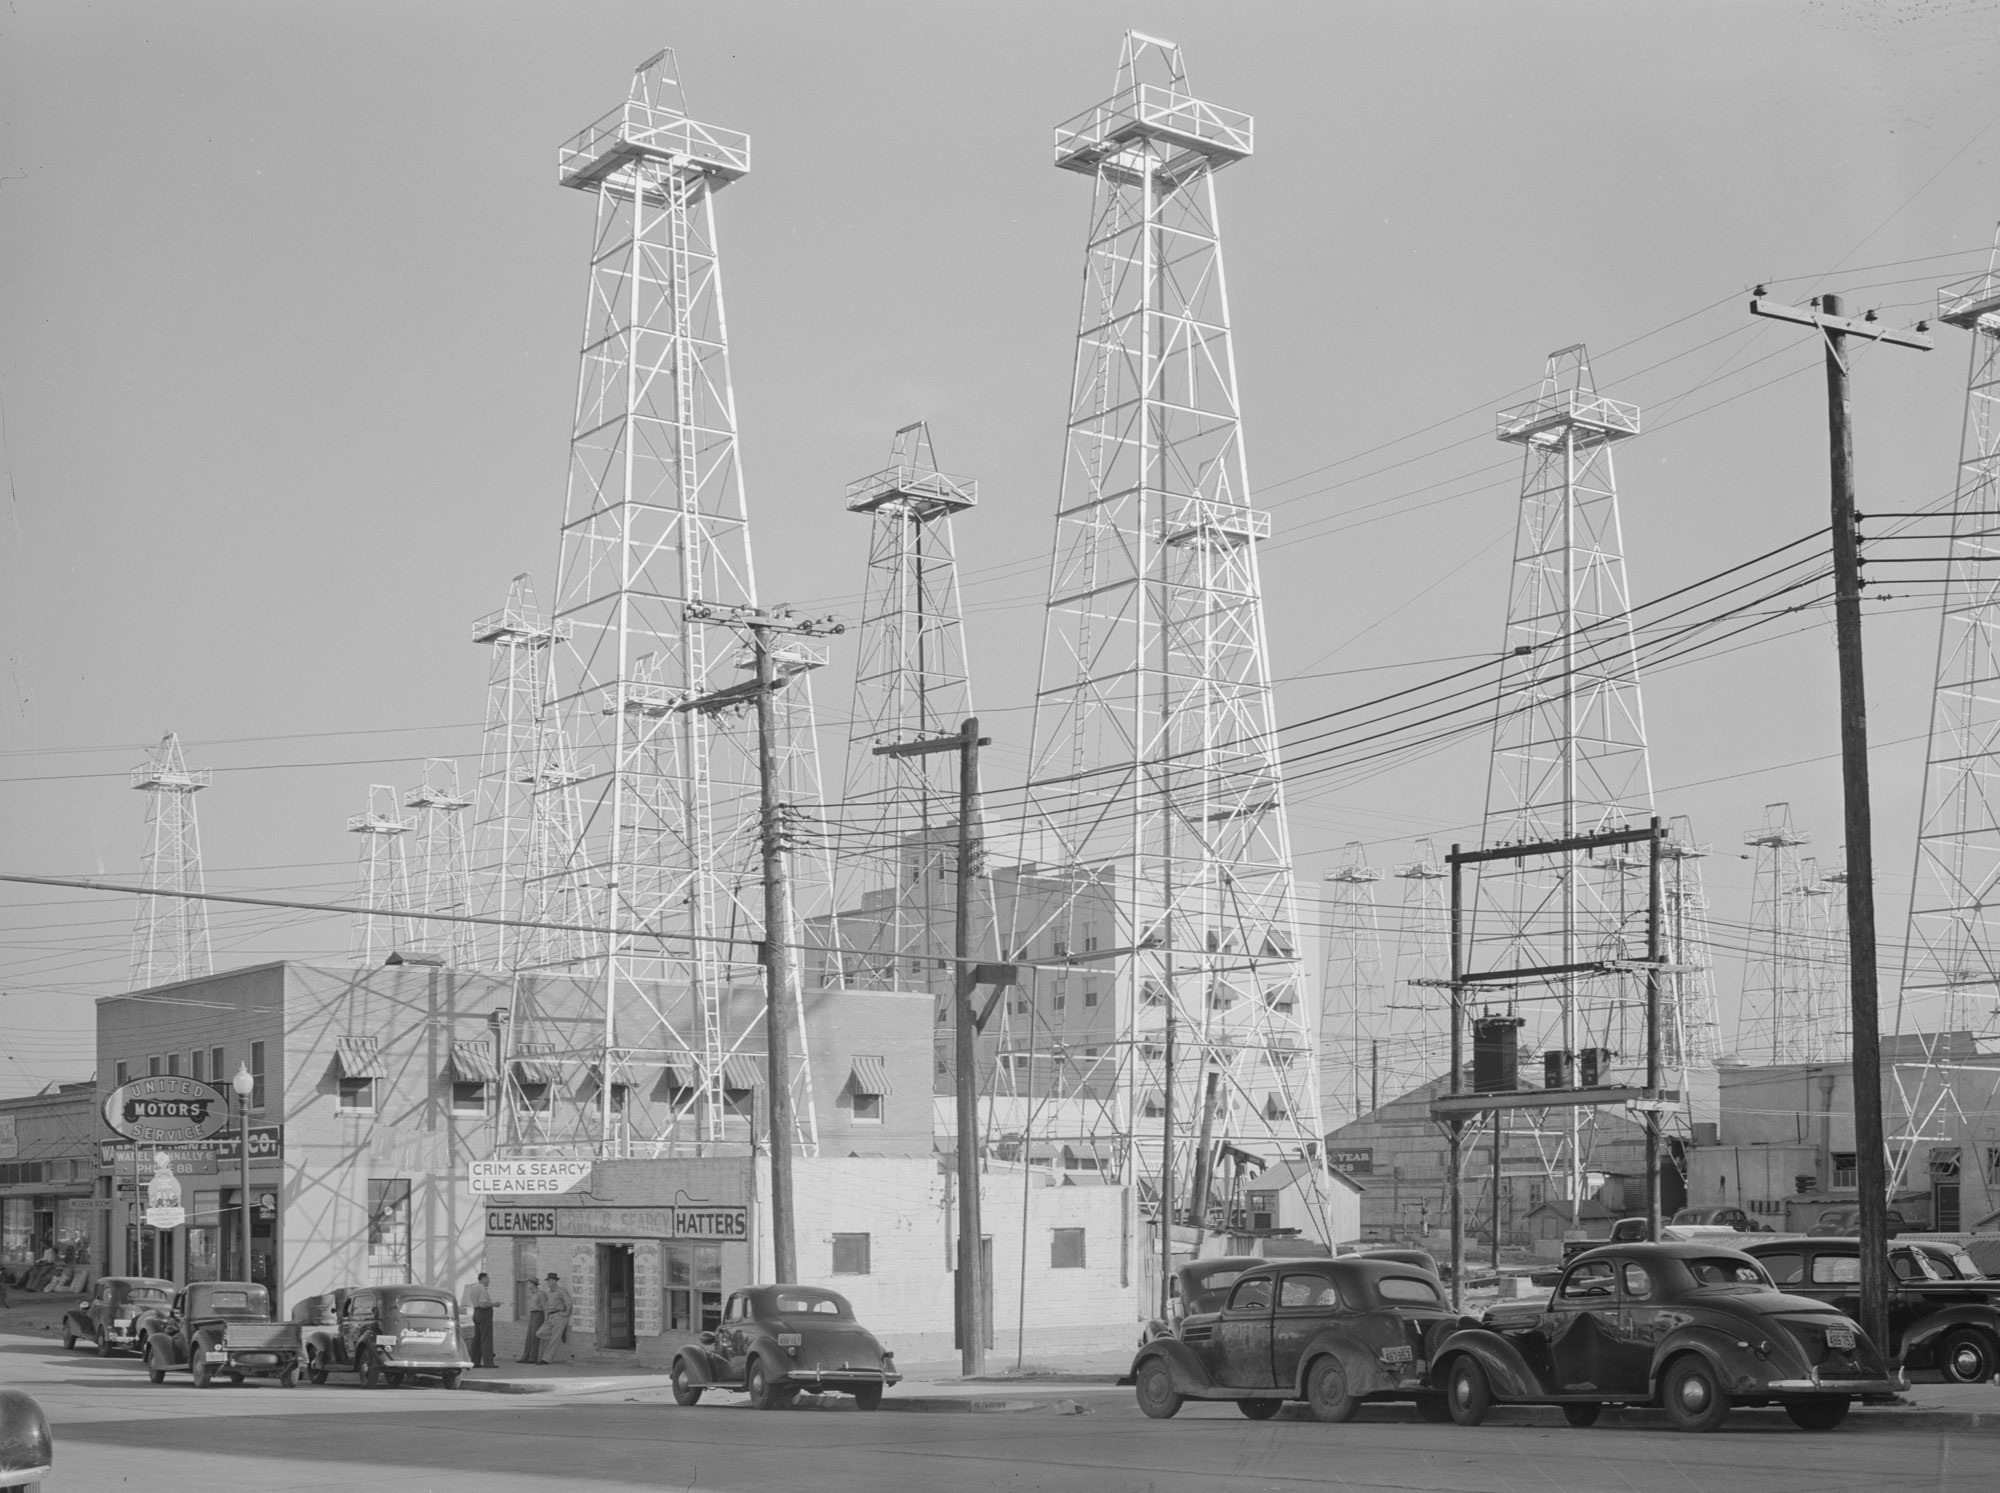 Black-and-white photograph of oil derricks in Kilgore, Texas, East Texas Oil Field, 1939. The derricks are placed among buildings of the town.